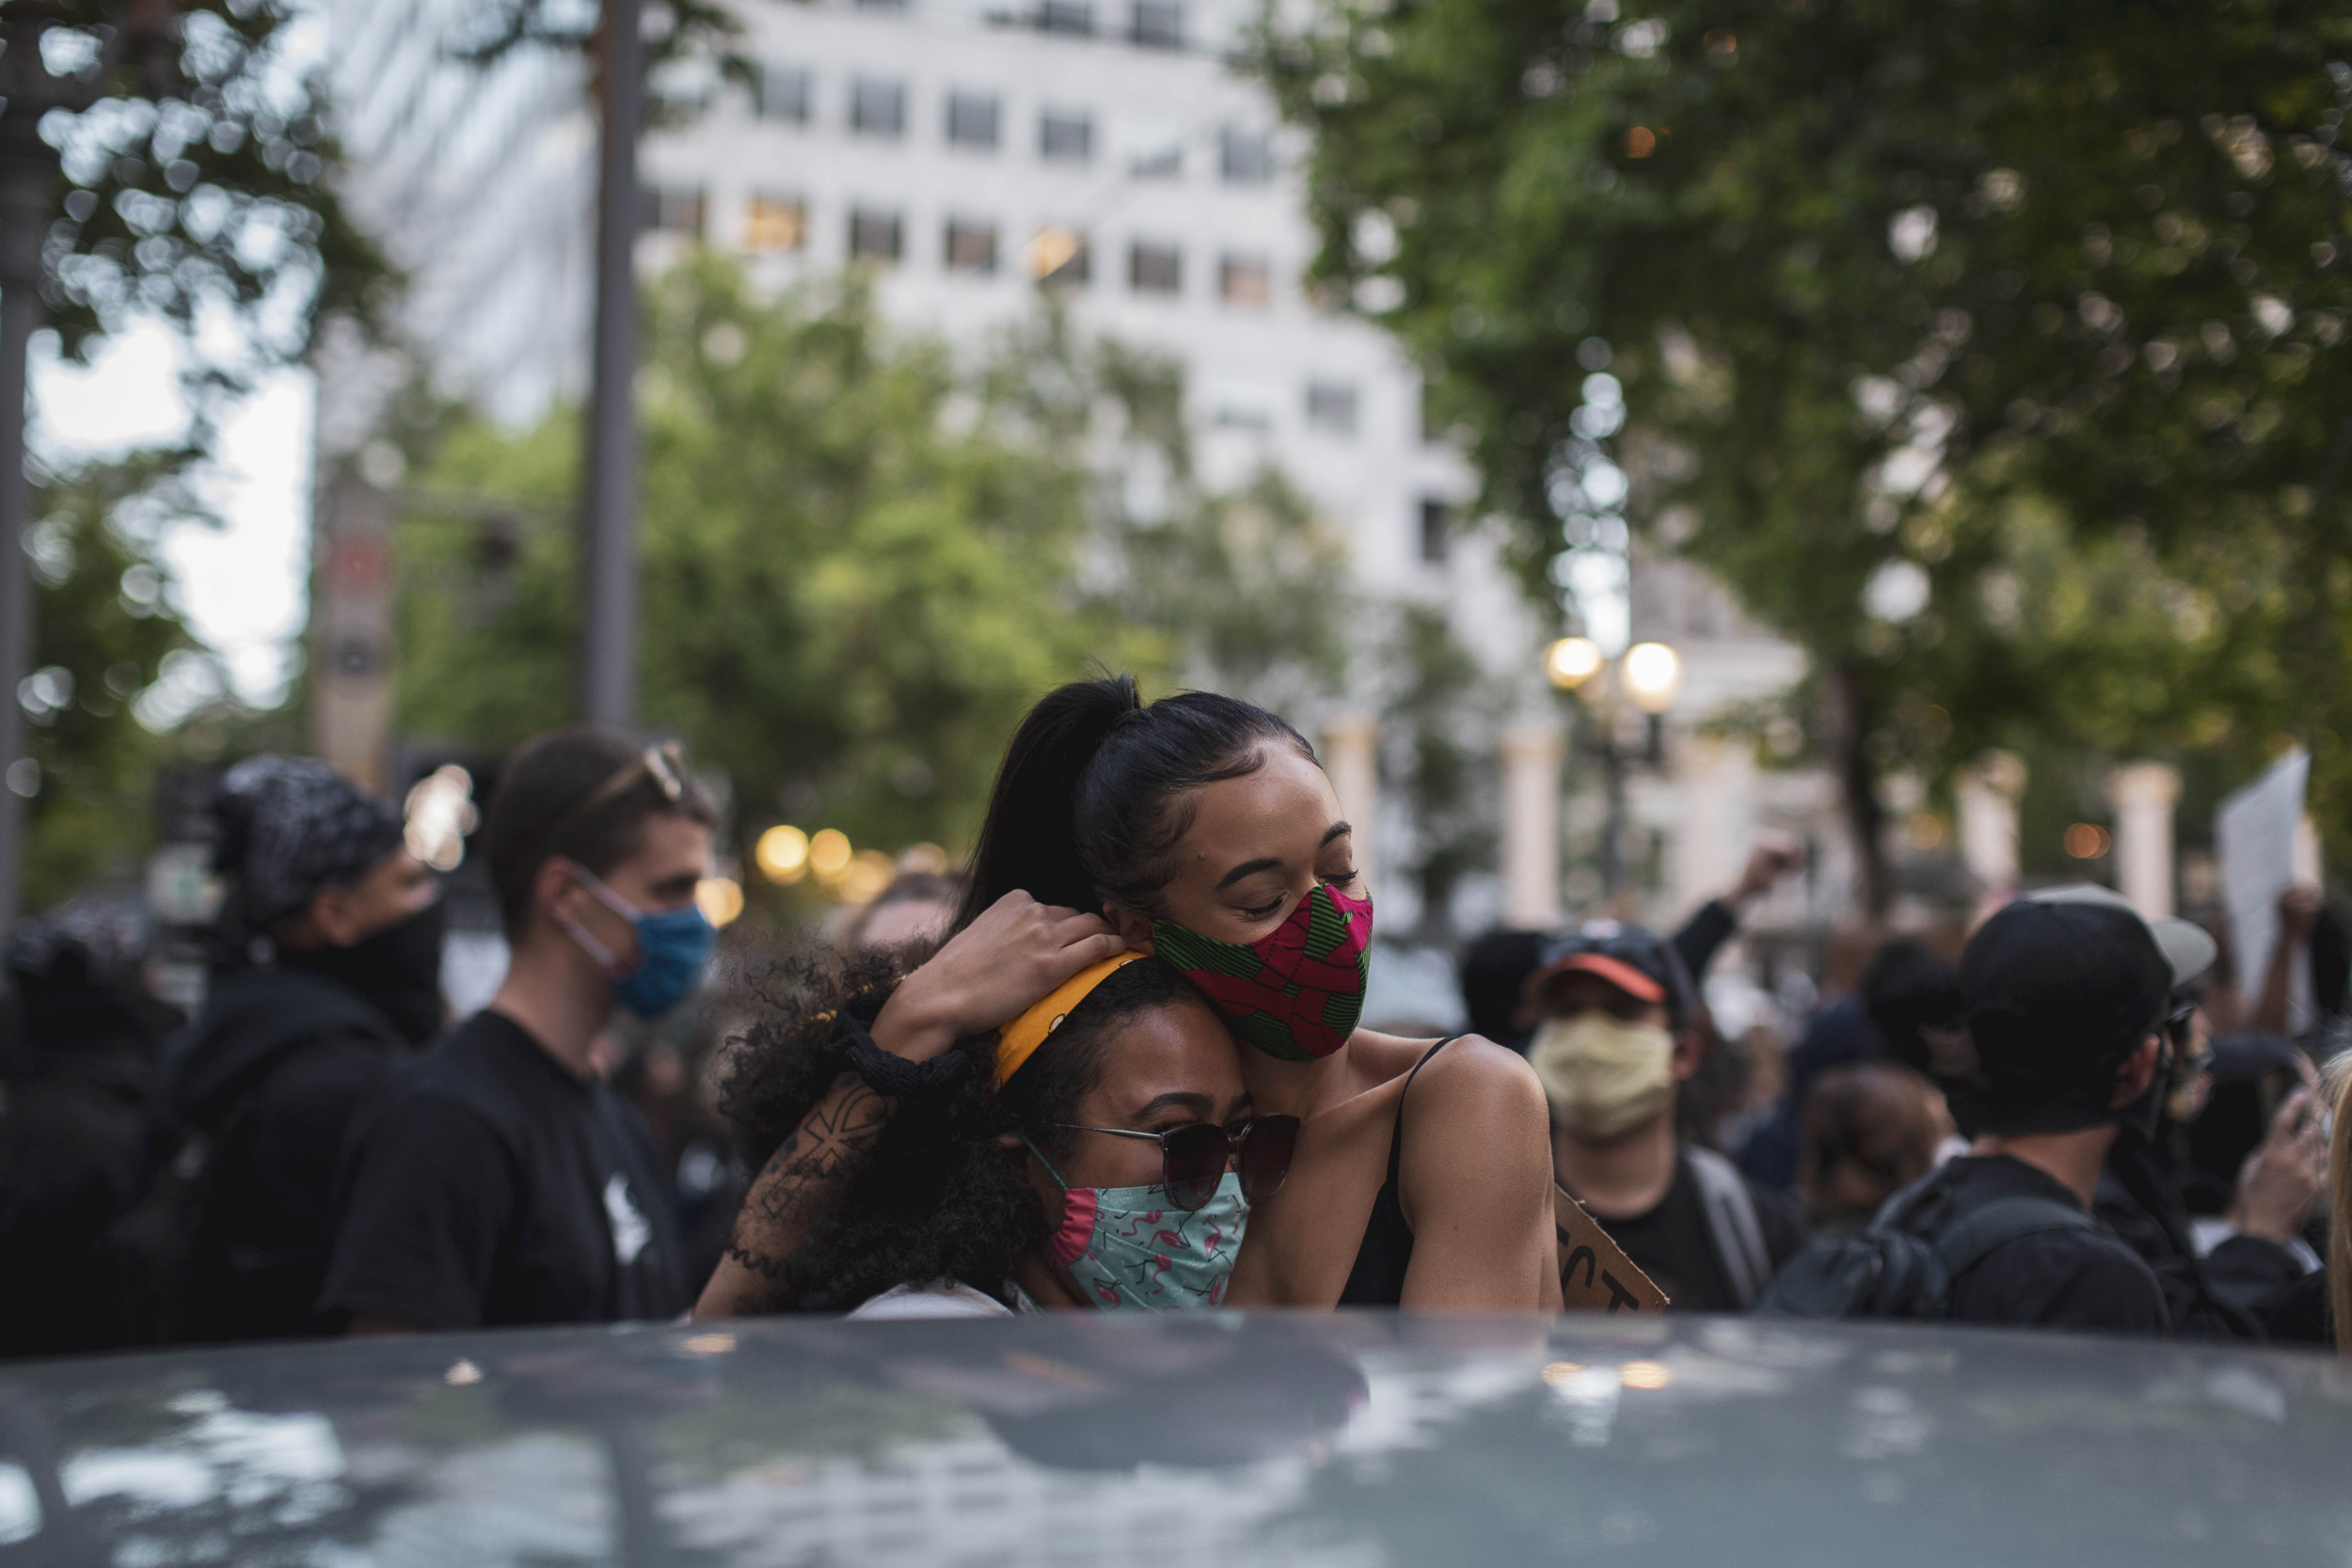 Two women embrace at Pioneer Square on Tuesday evening, June 3. Protests continued for a sixth night in Portland, demonstrating against the death of George Floyd, a black man killed by police in Minneapolis. Brooke Herbert / Staff